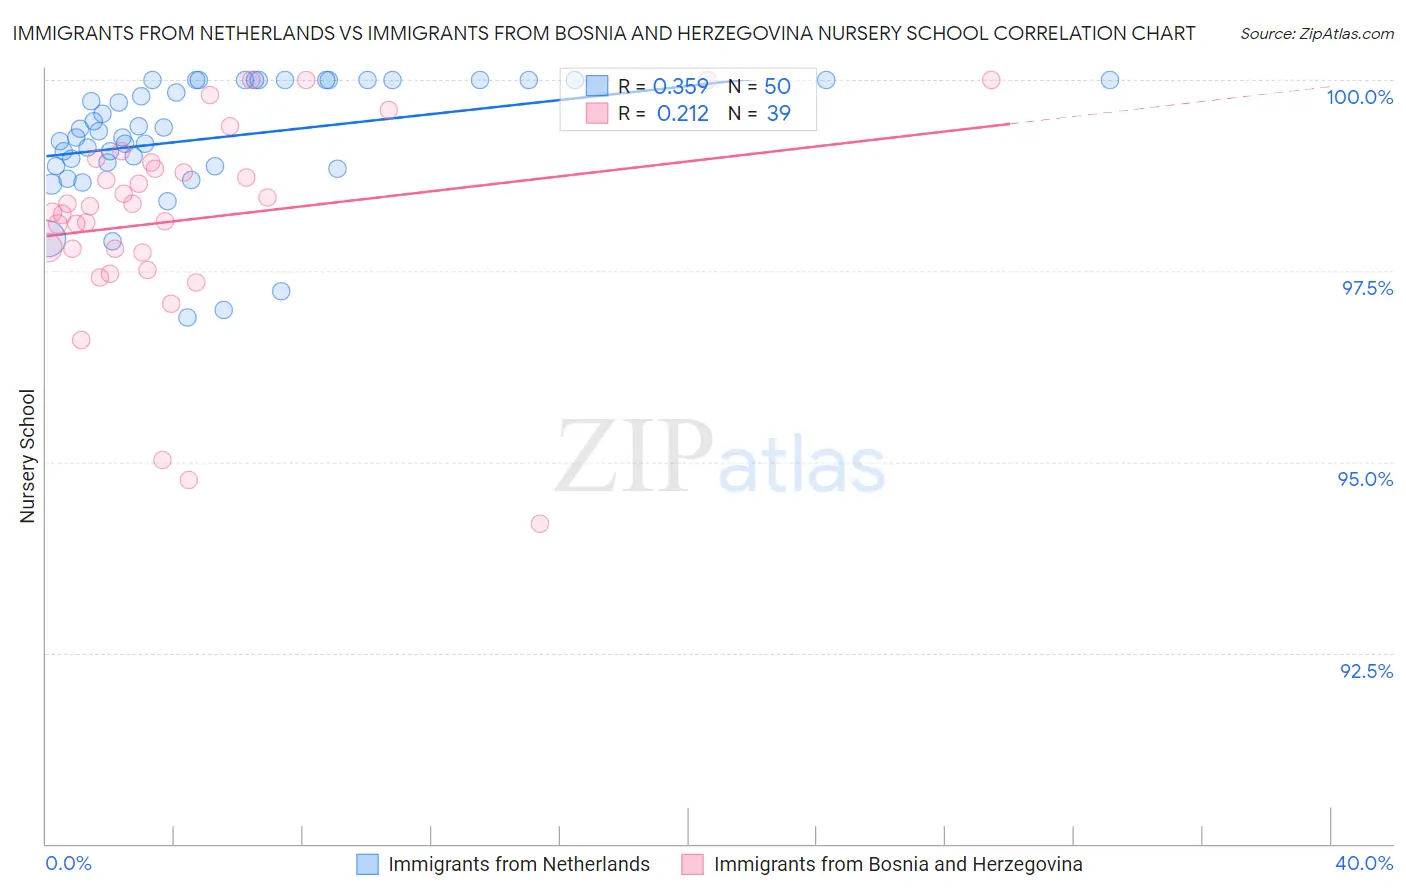 Immigrants from Netherlands vs Immigrants from Bosnia and Herzegovina Nursery School